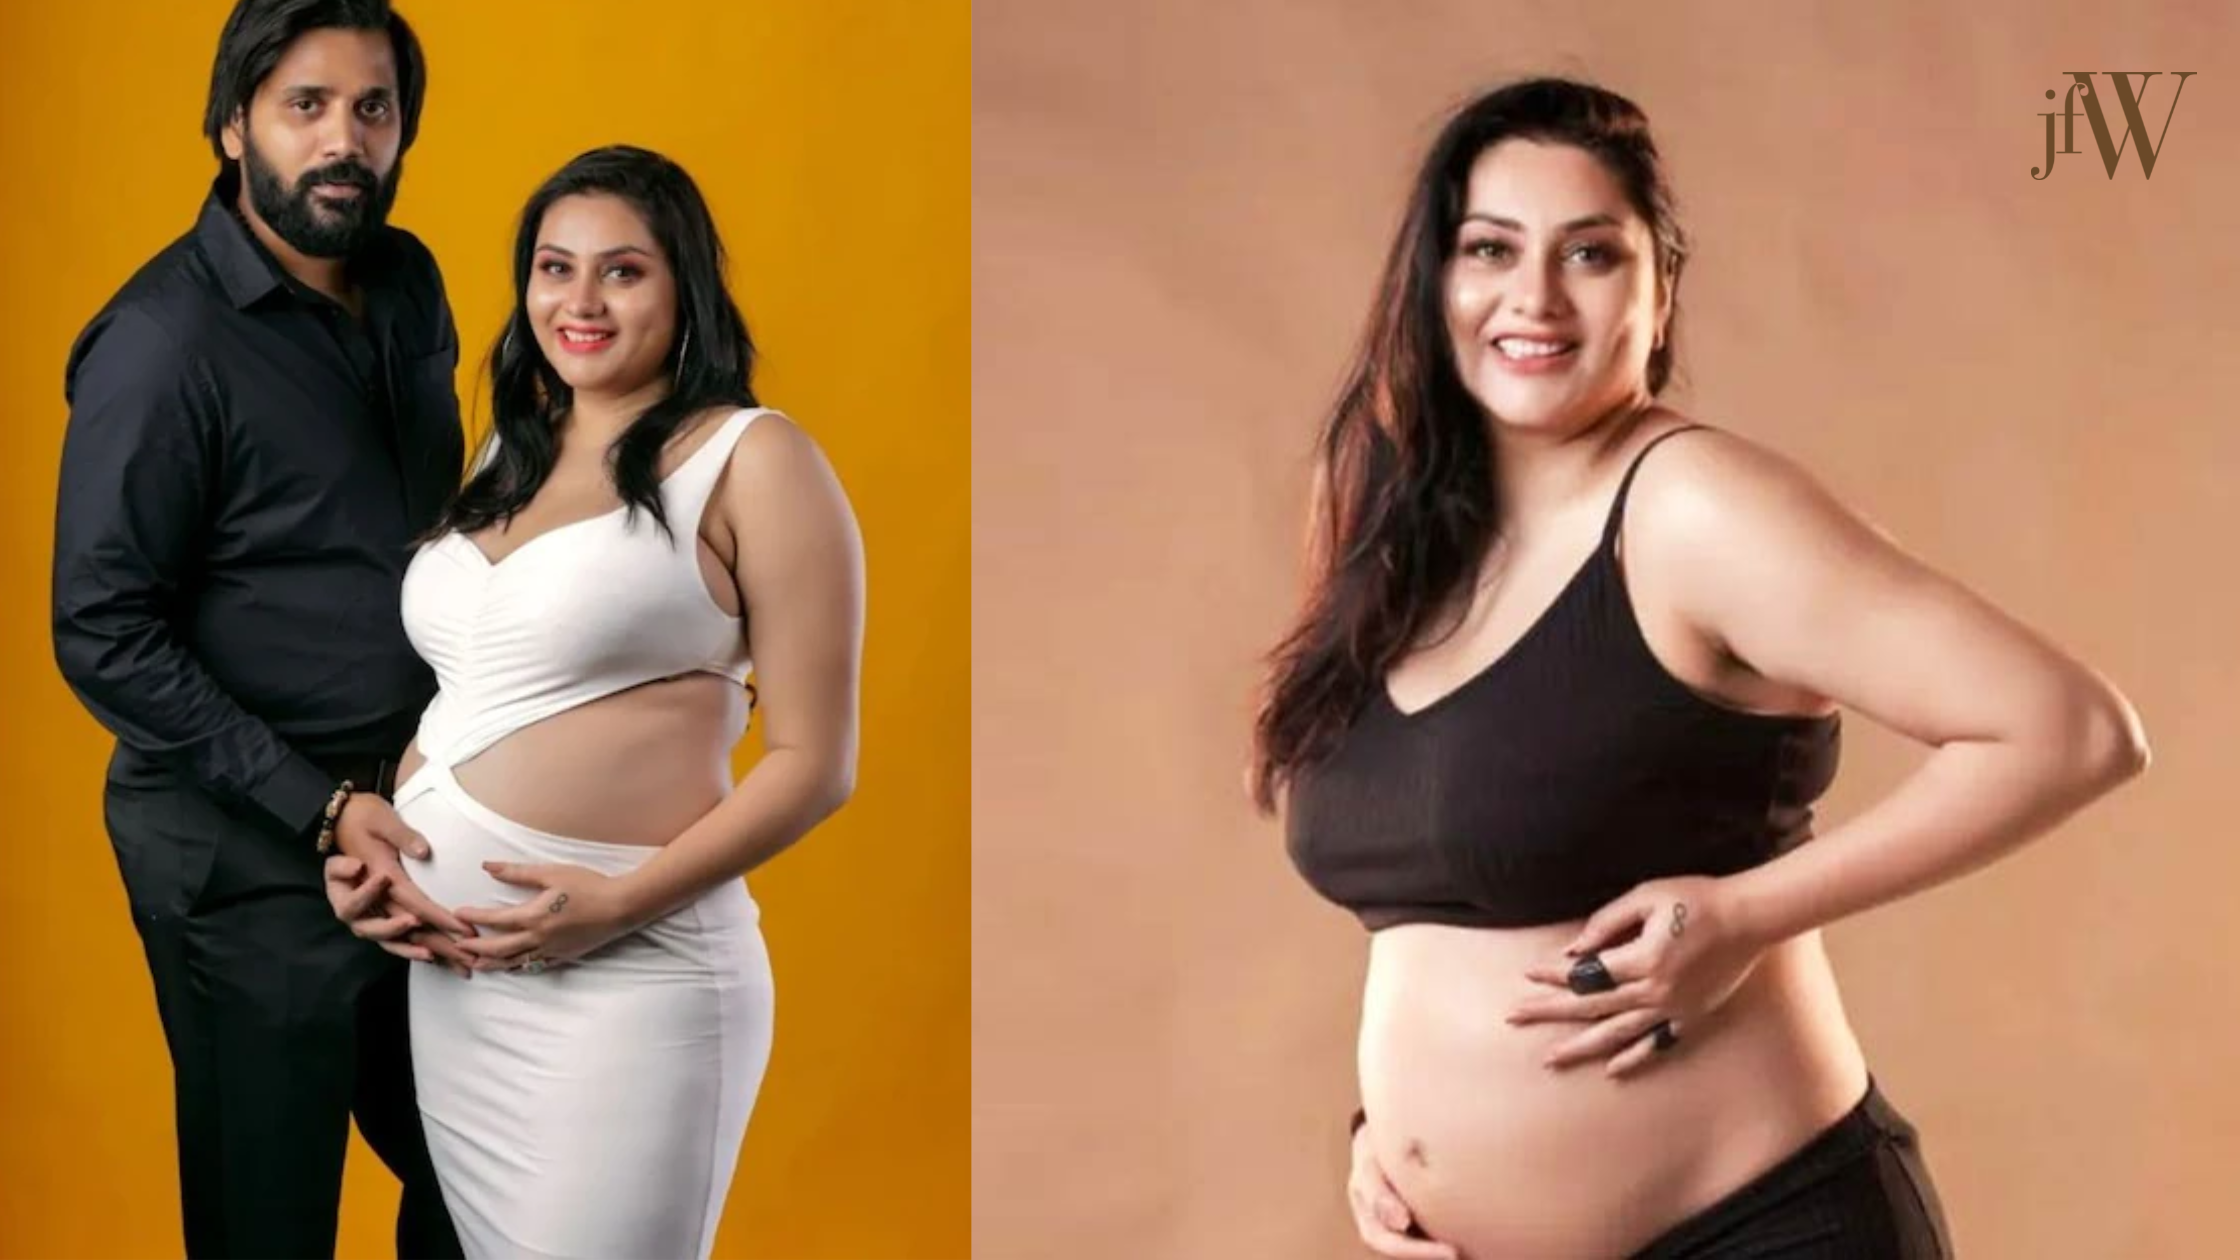 Pregnant Aunties Telugu Videos - Actress Namita blessed with twins! Watch Video! | JFW Just for women